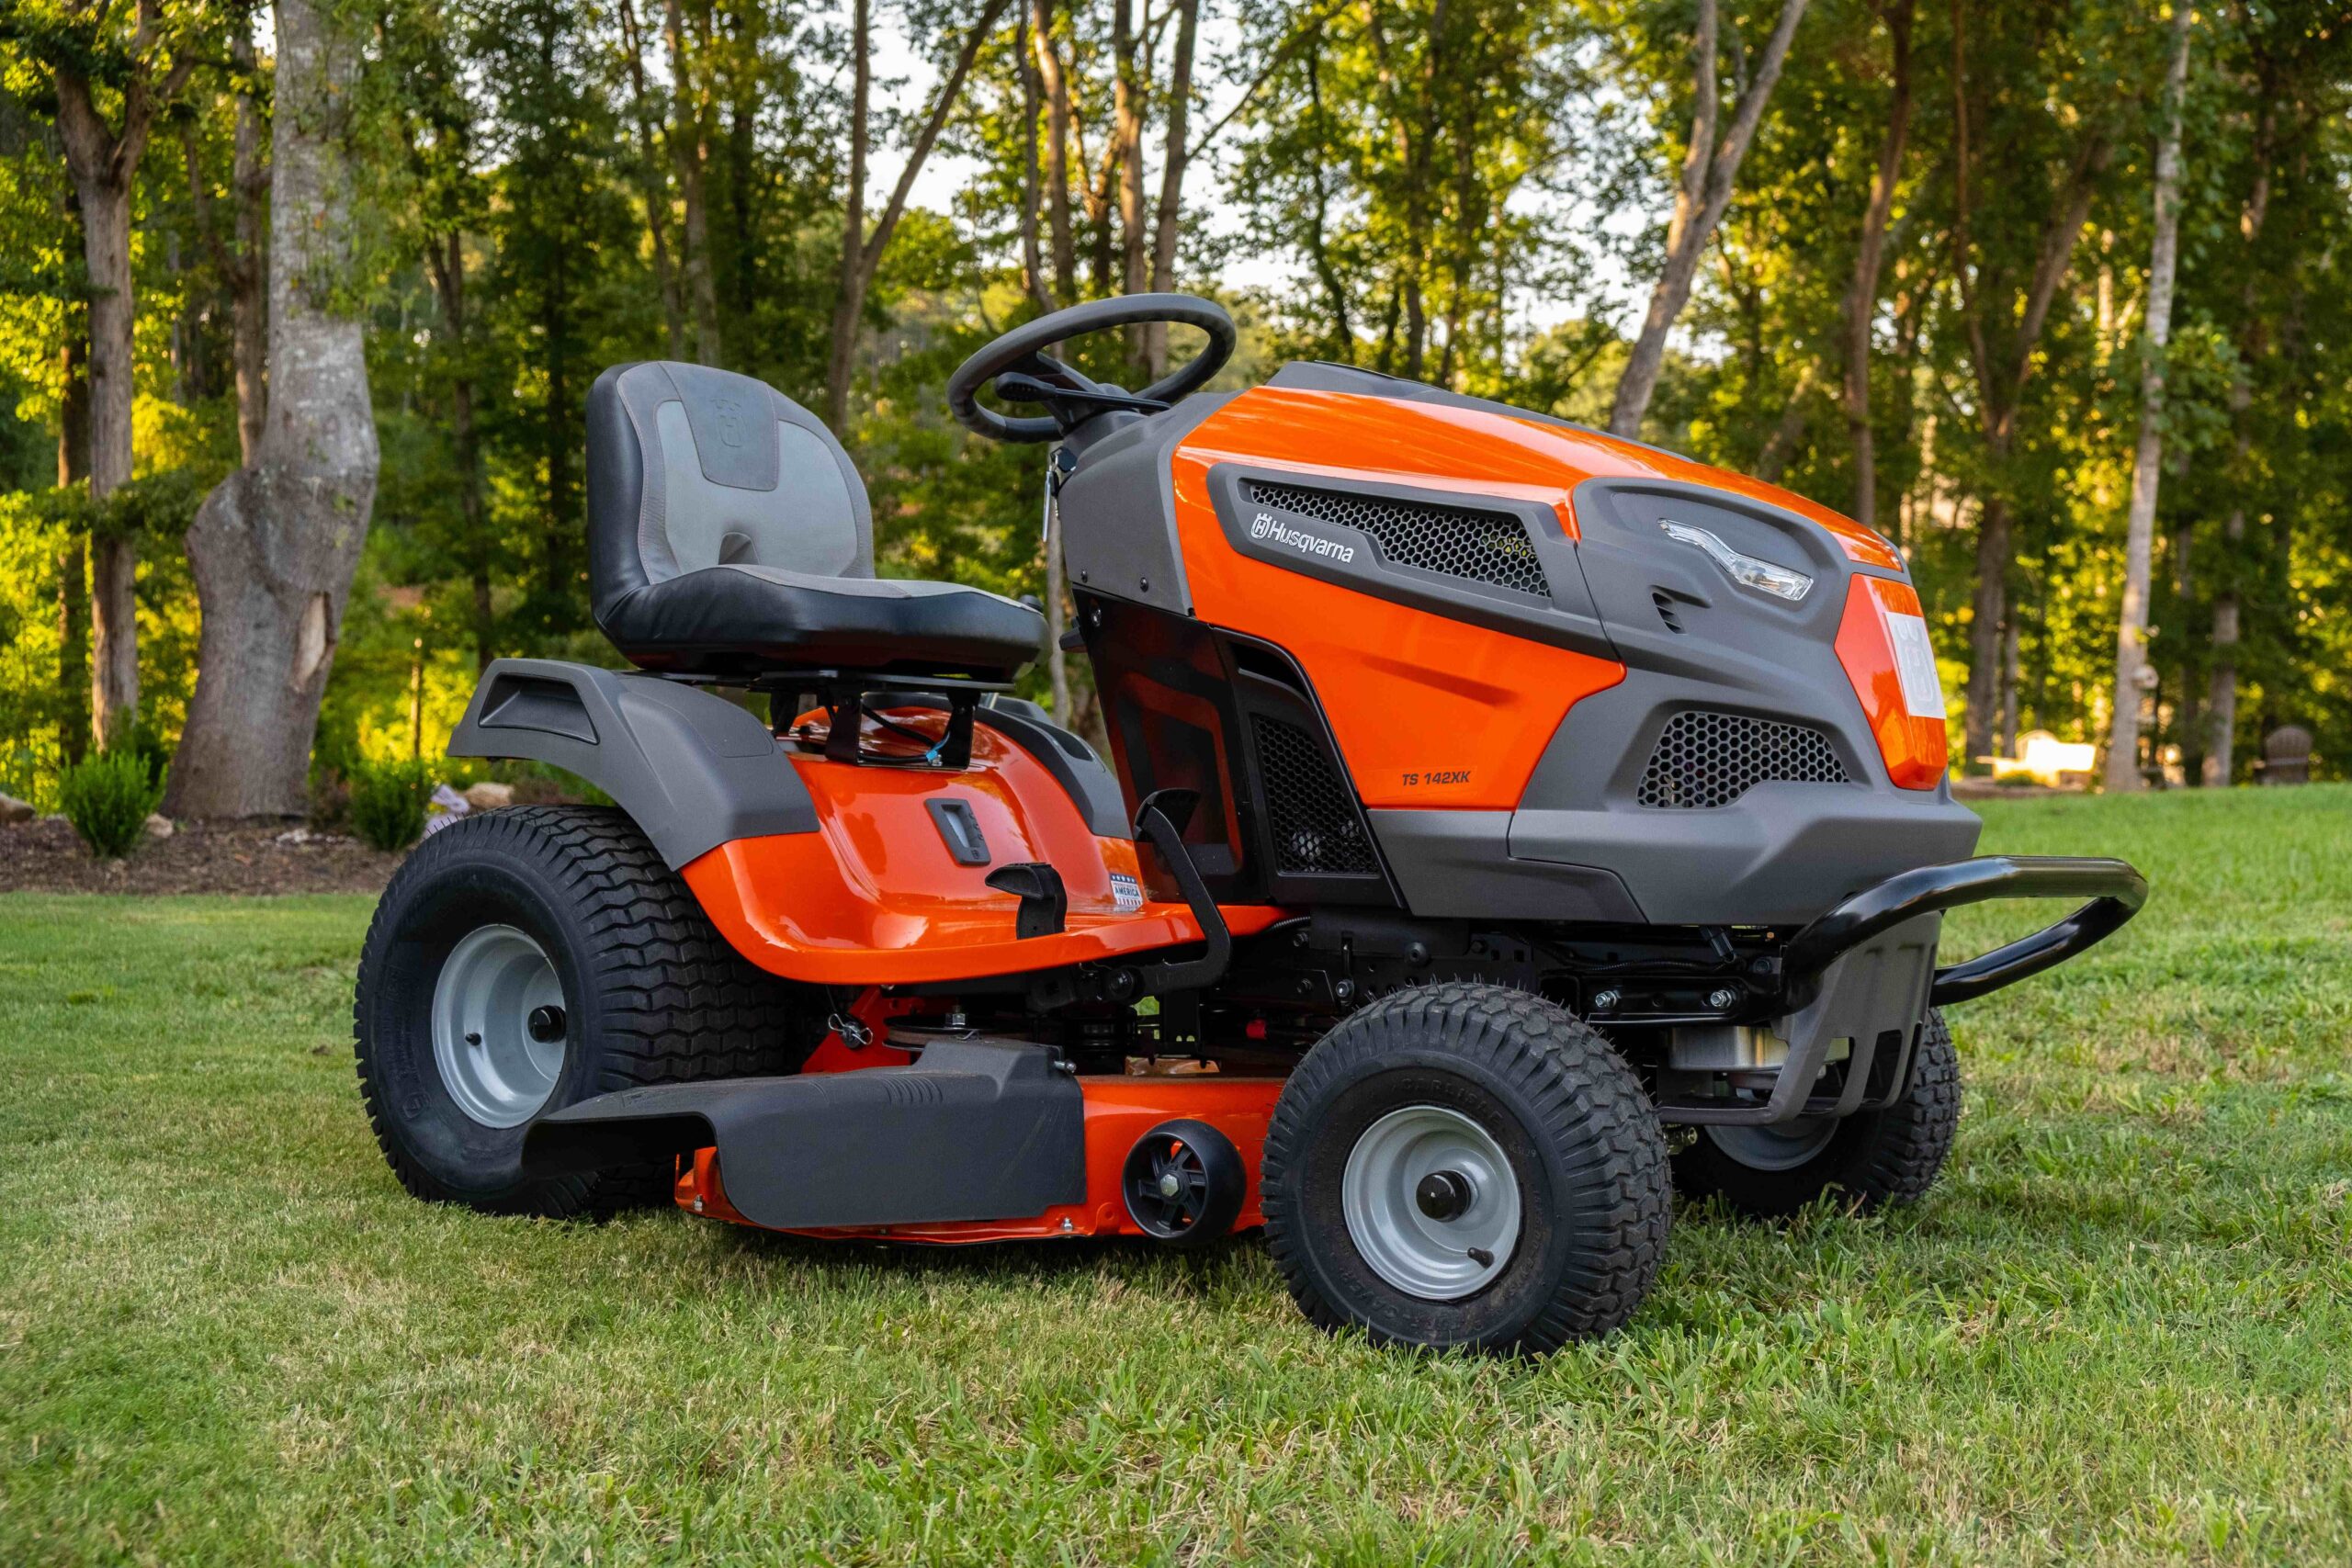 A photo of a large riding mower